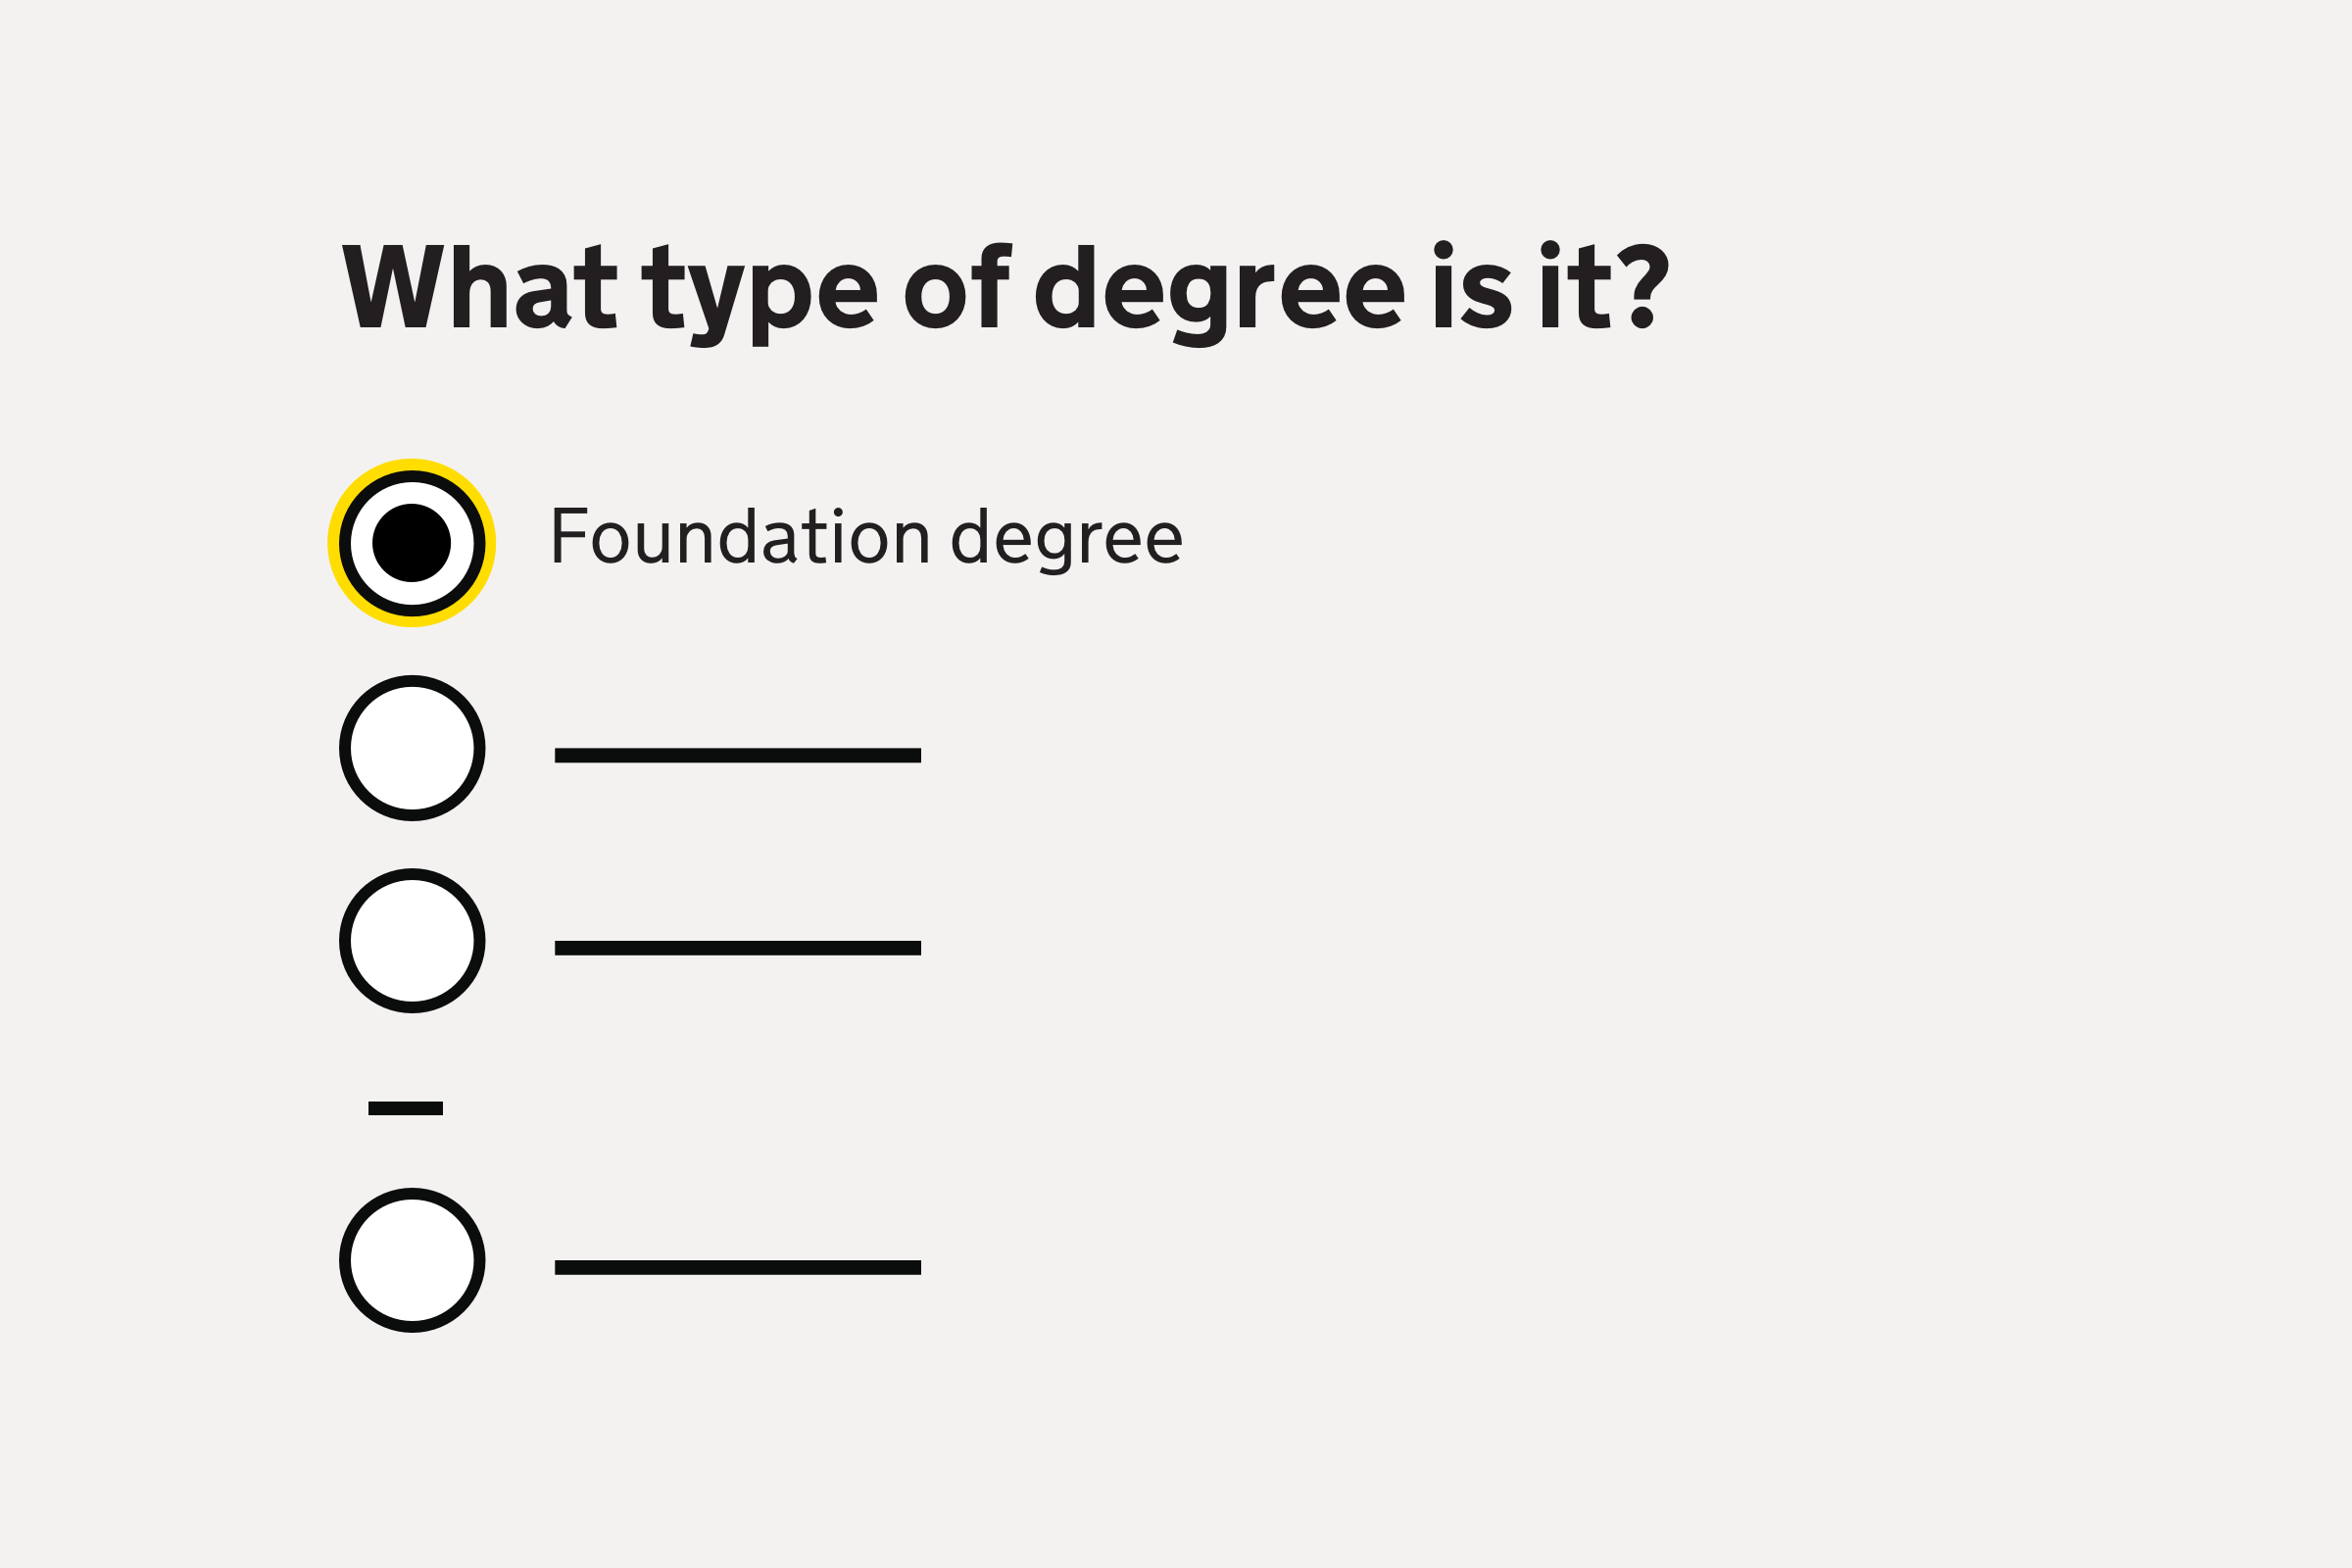 Q: What type of degree is it? A: Foundation degree